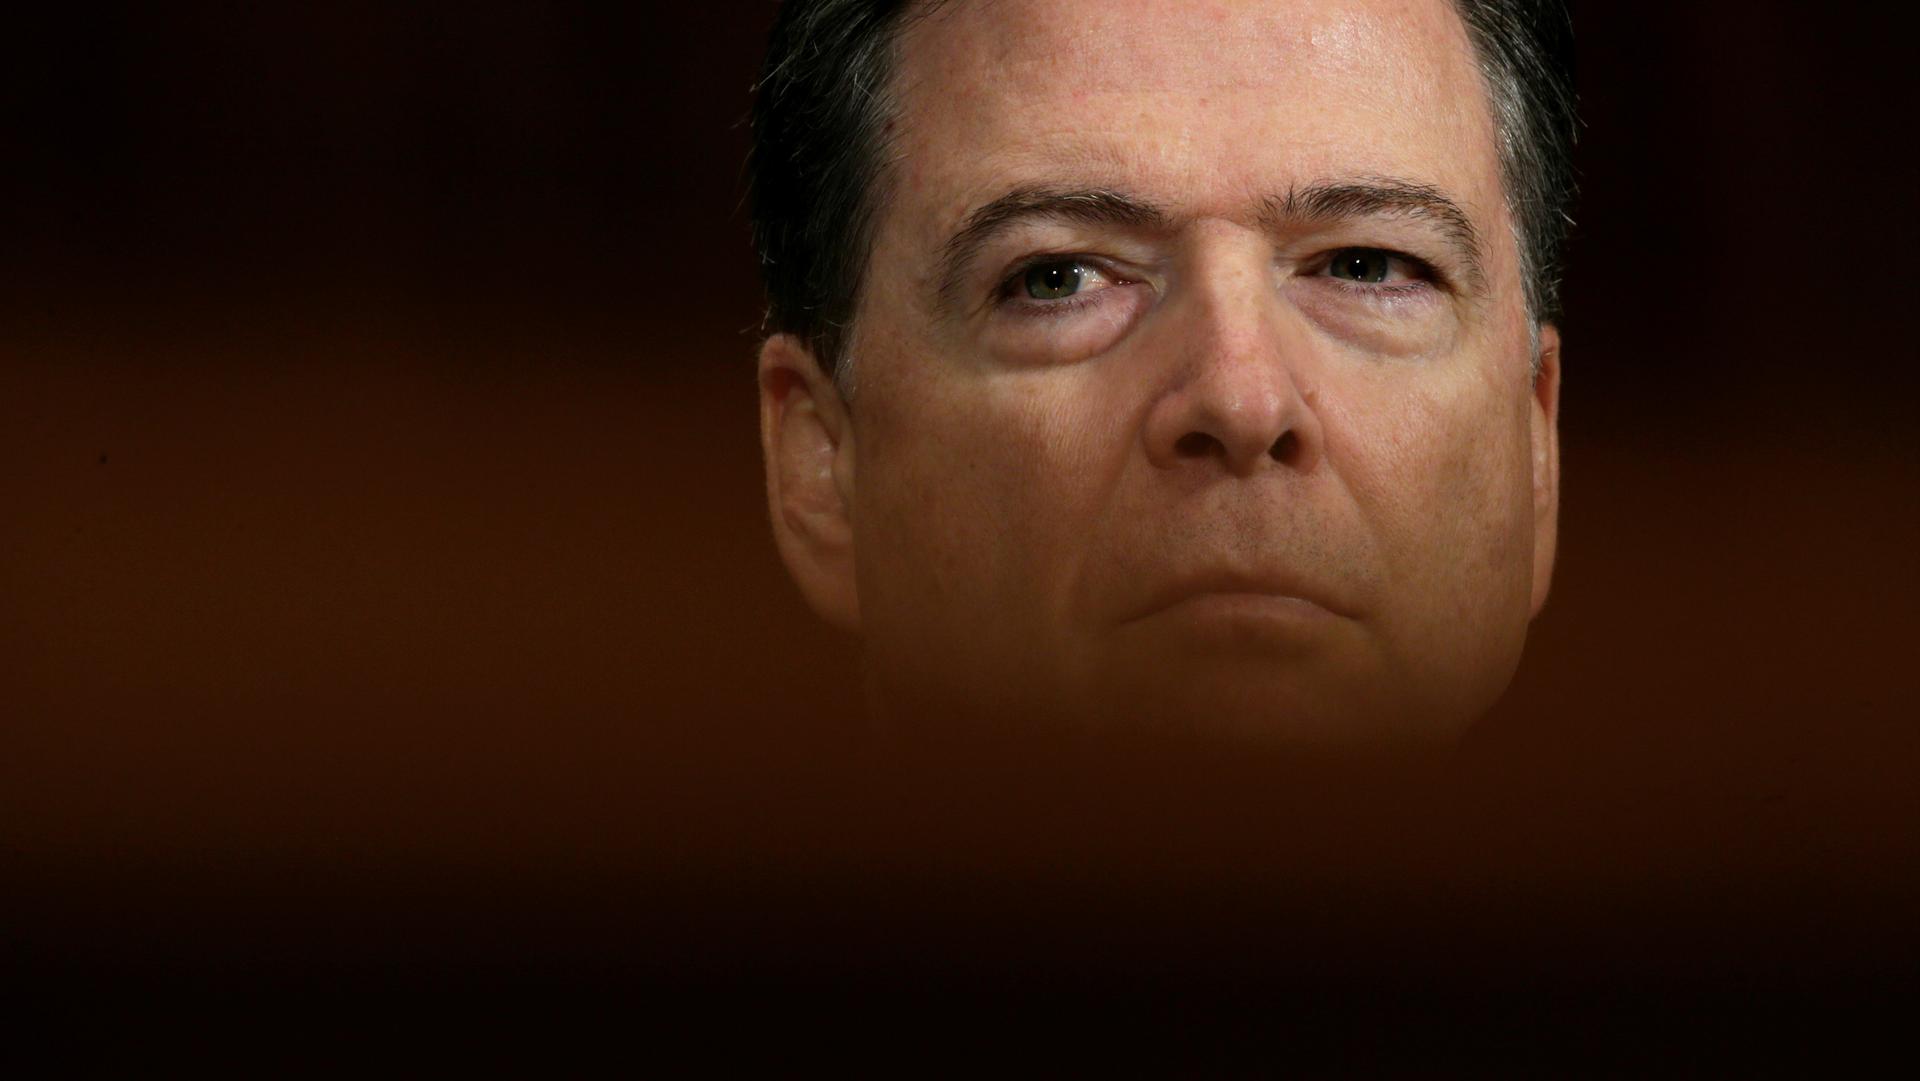 James Comey was dismissed by Donald Trump as FBI director.